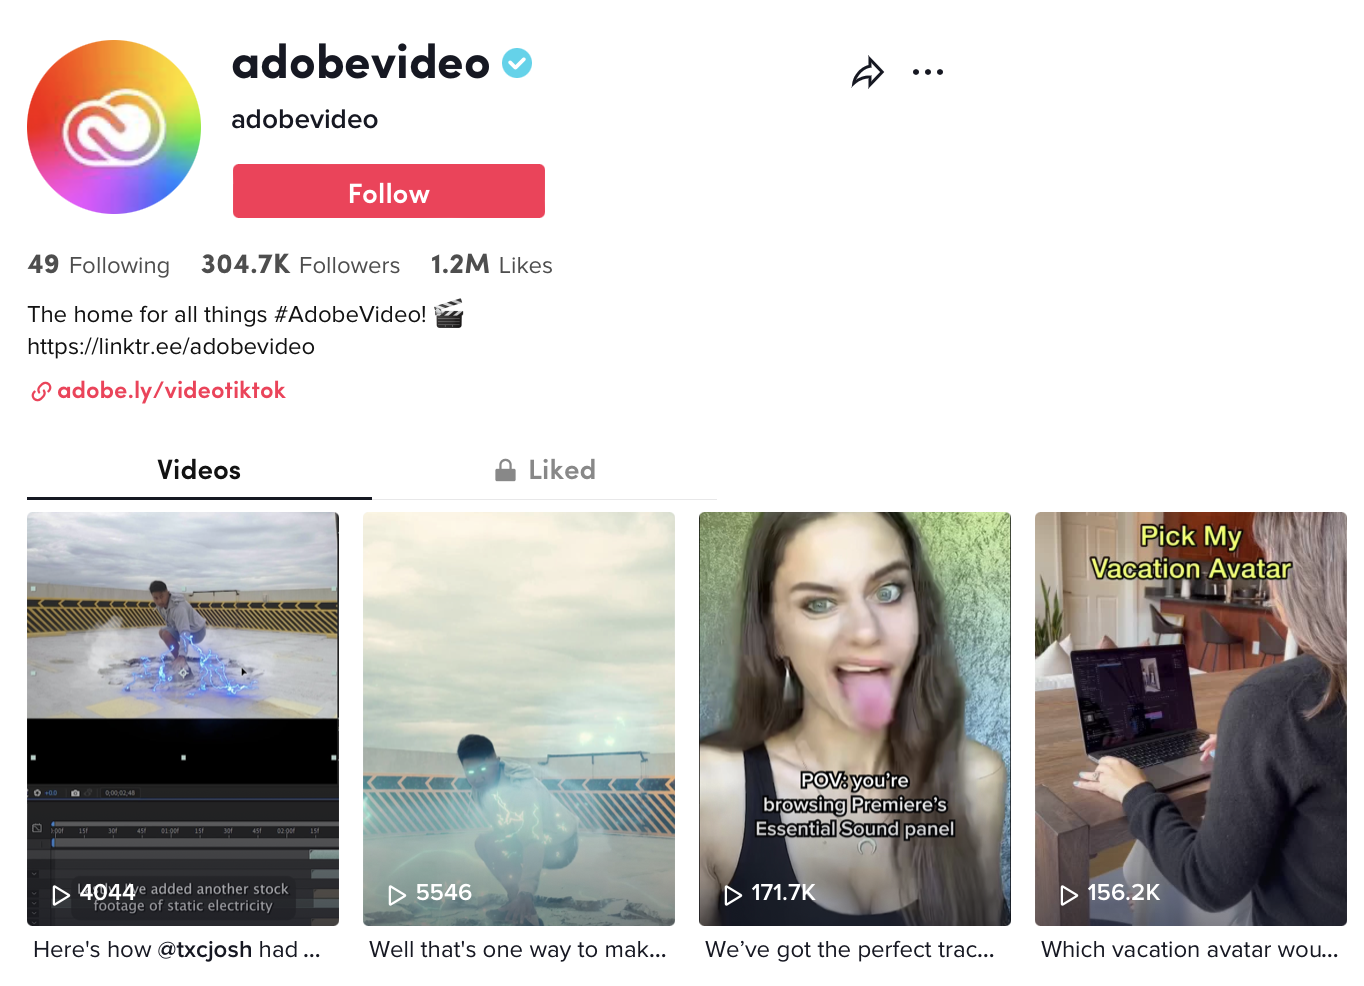 Here is a screenshot showing how Adobe uses TikTok for B2B marketing